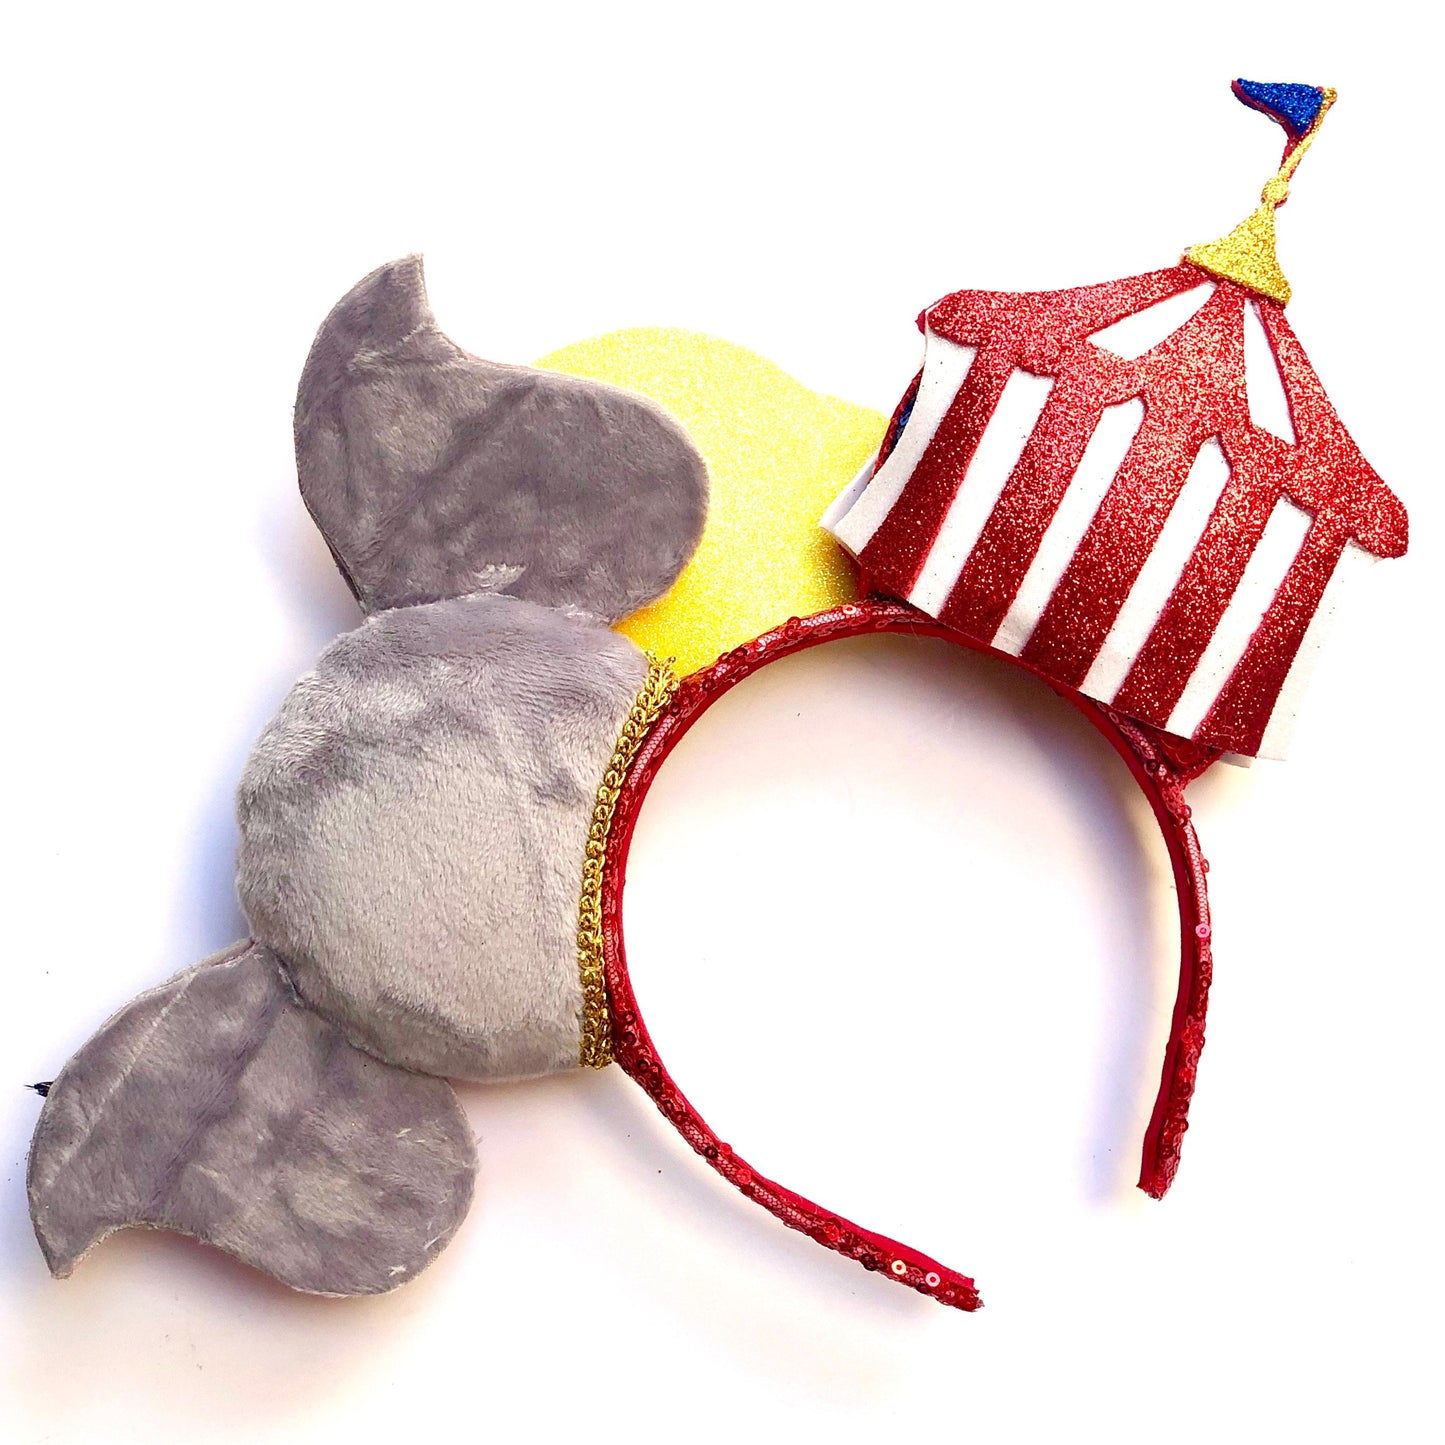 Circus Tent Elephant MB Mouse Ears